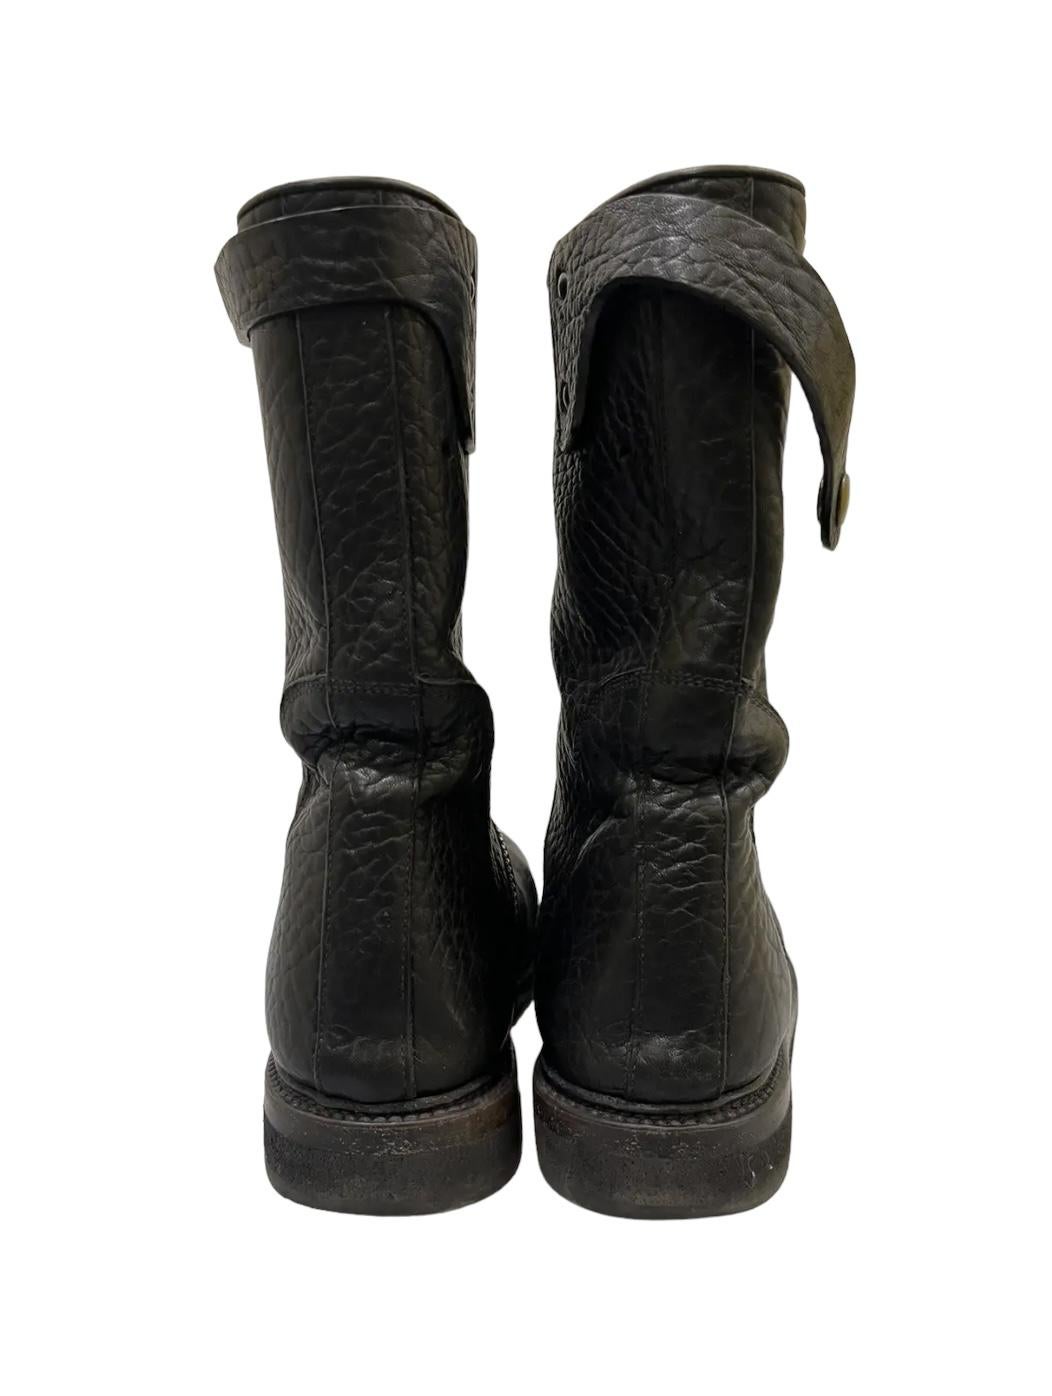 Women's Rick Owens FW 11 Limo Spiral Leather Zip Boots